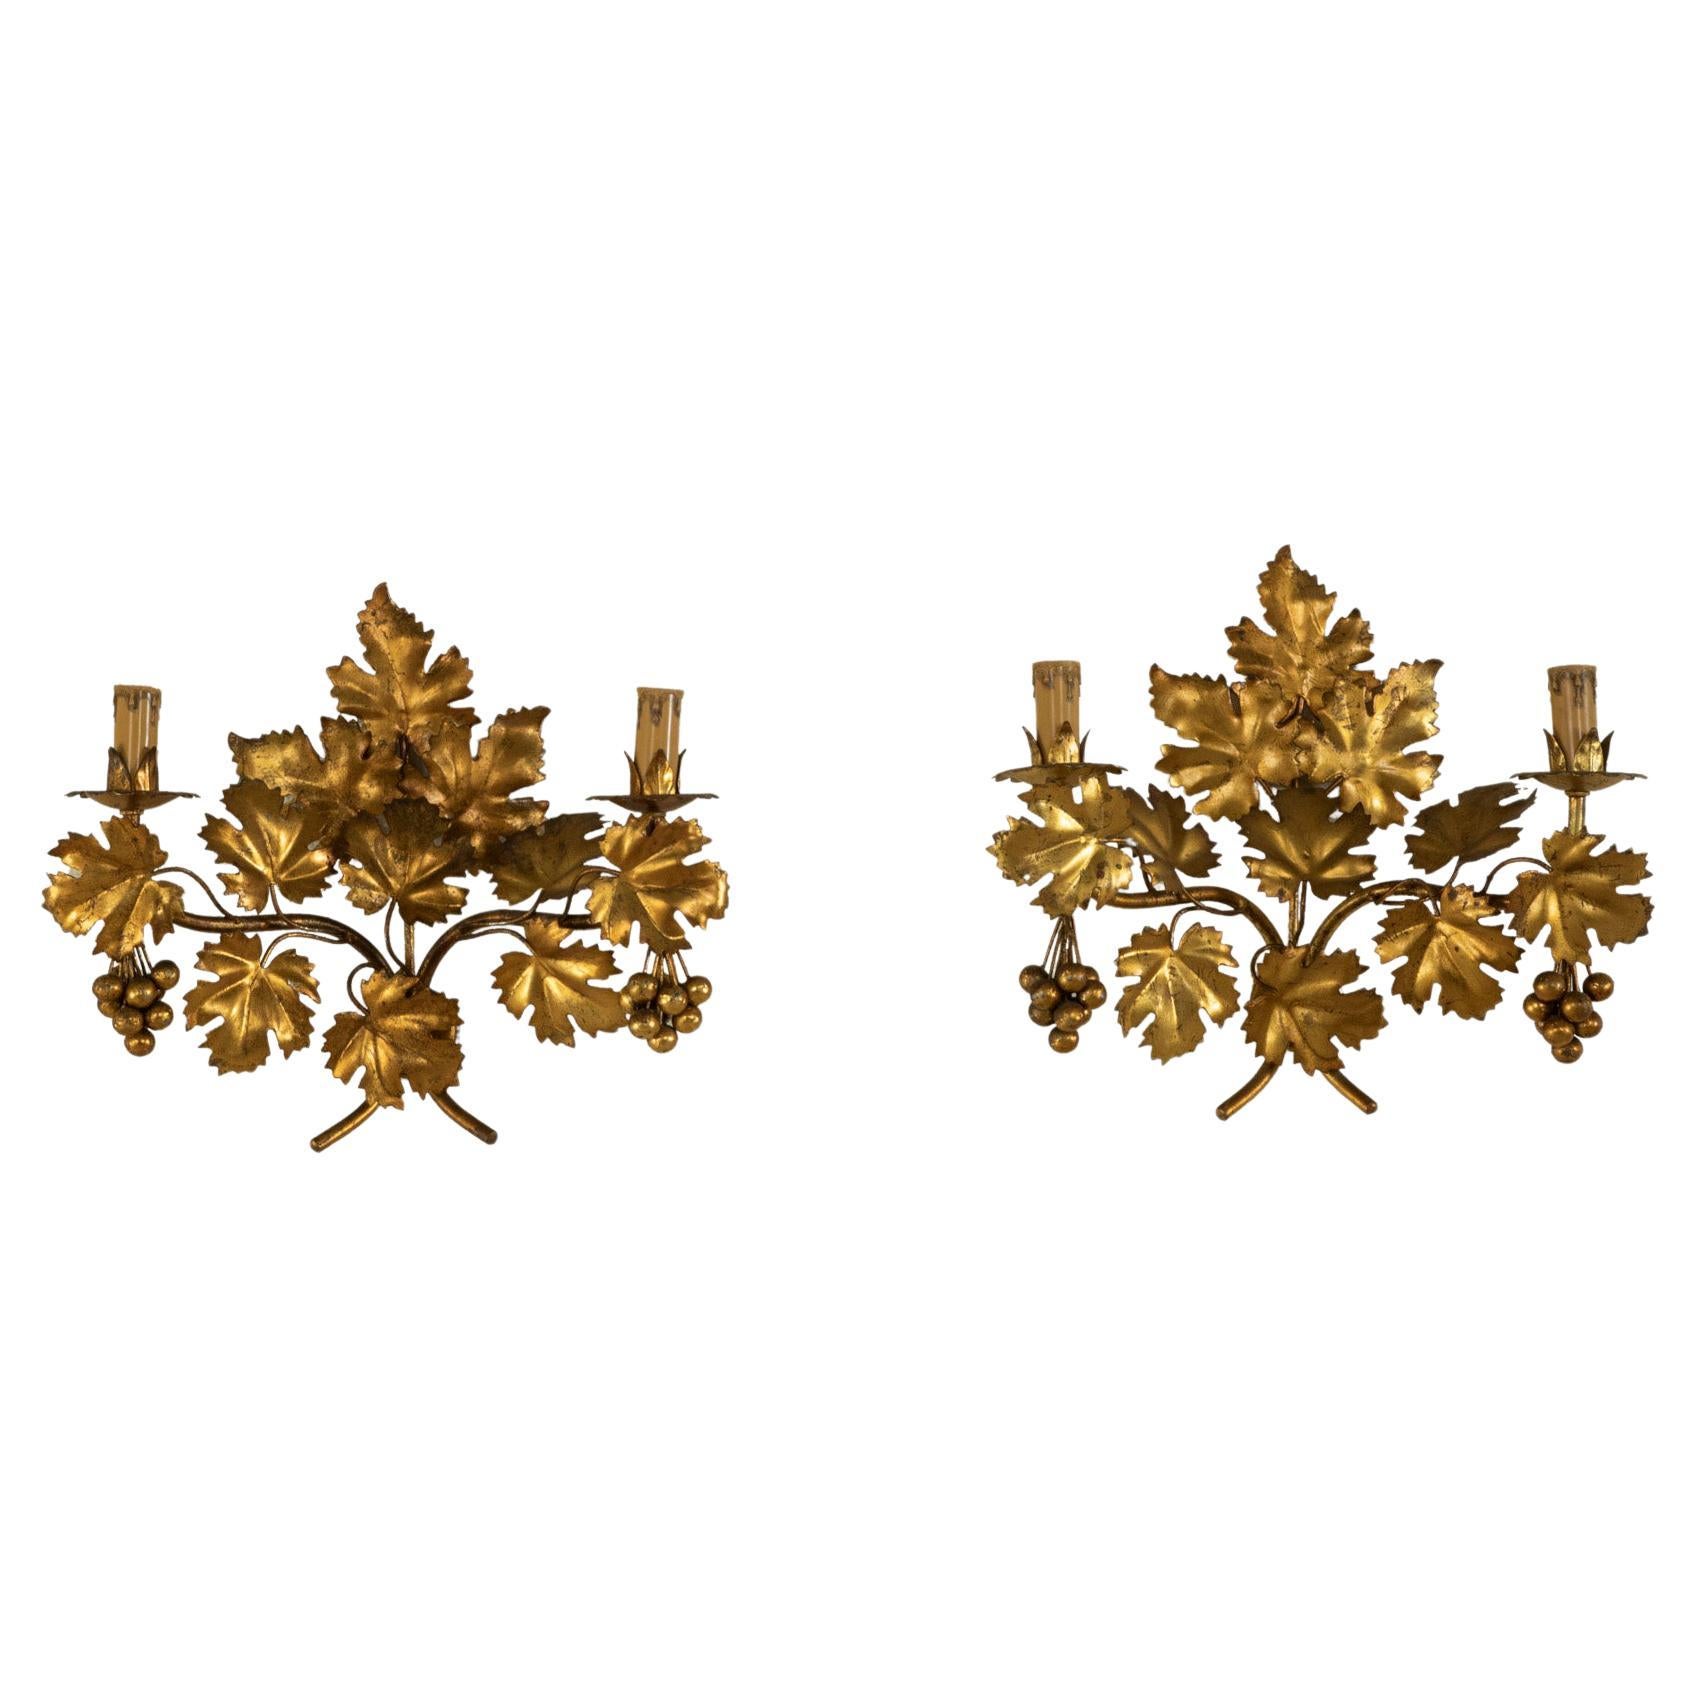 Pair of Mid-20th Century Italian Gilt Metal Sconces with Grape Leaves